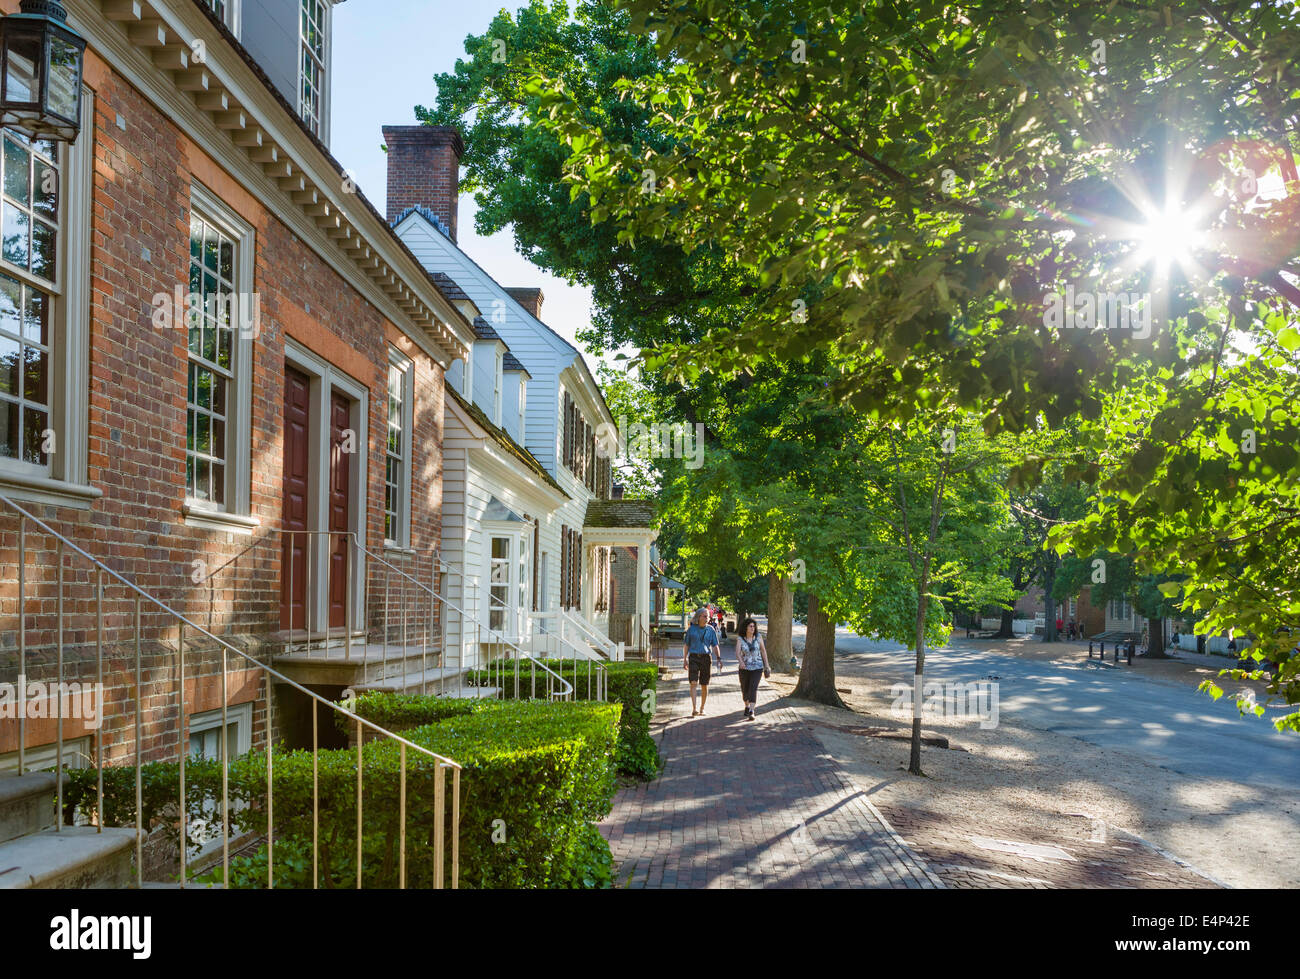 Duke of Gloucester Street in historic Colonial Williamsburg in the late afternoon, Virginia, USA Stock Photo